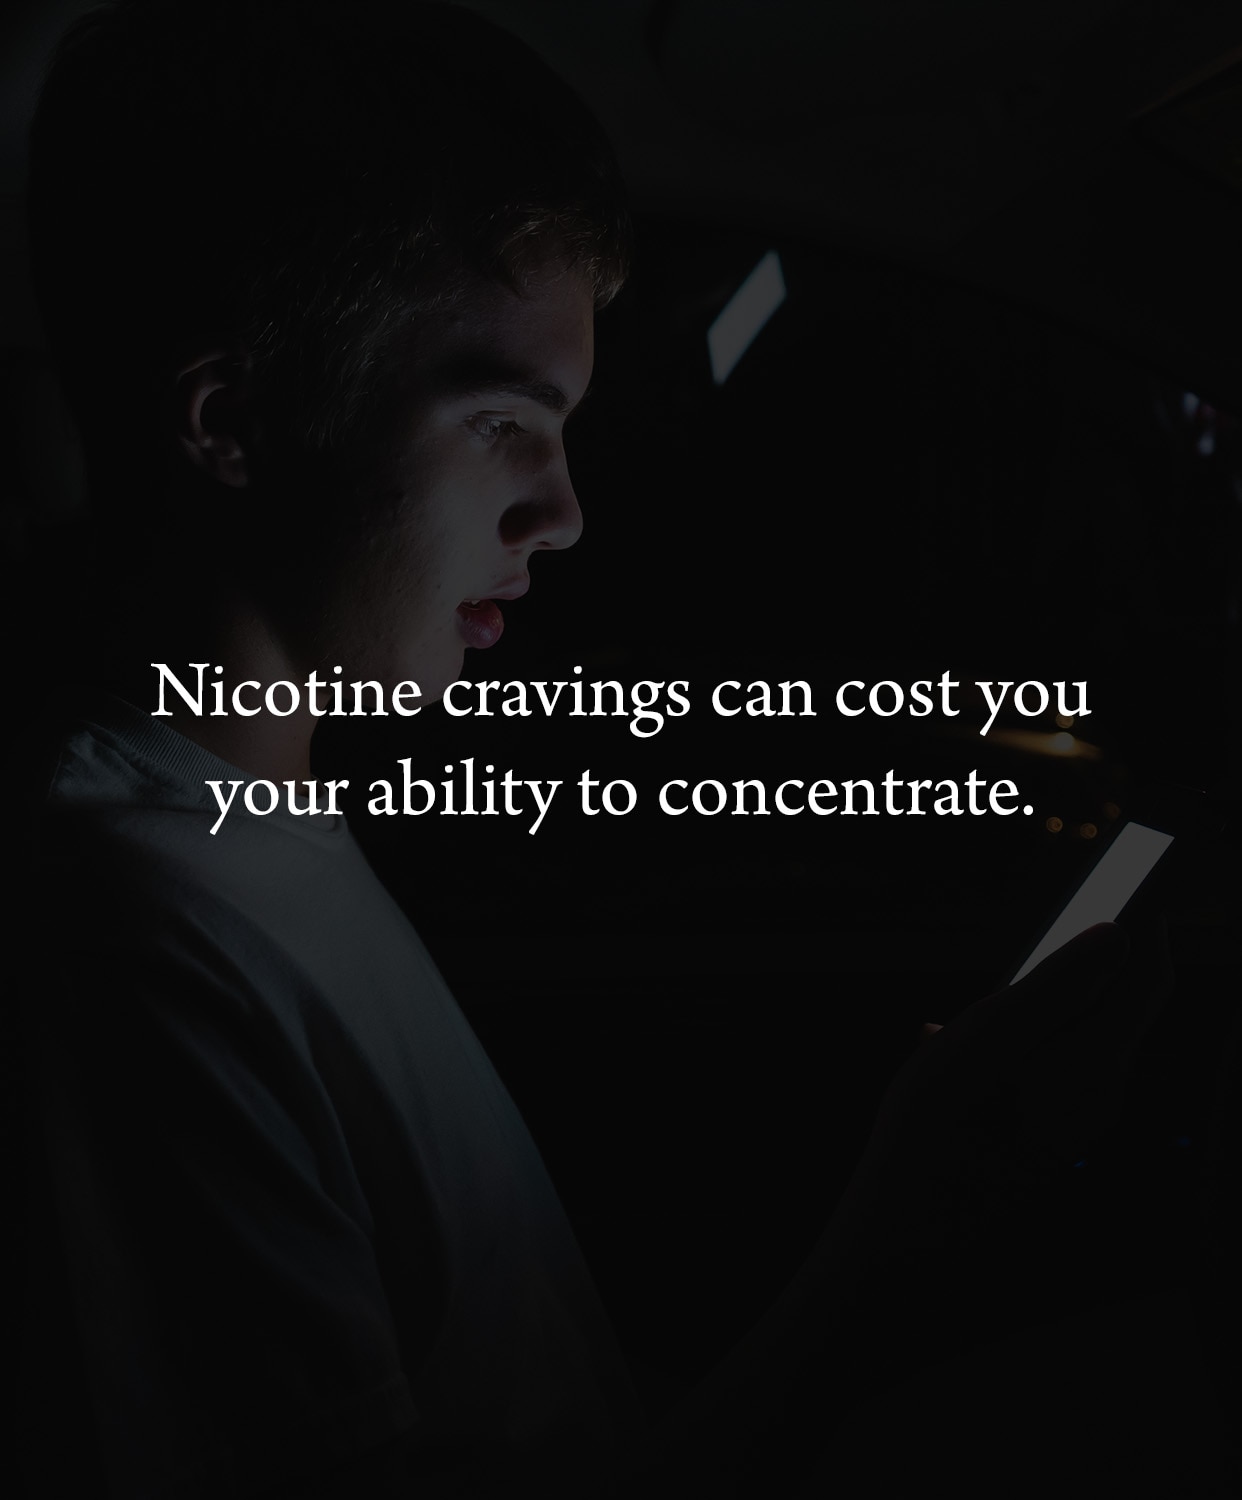 Nicotine cravings can cost you your ability to concentrate.